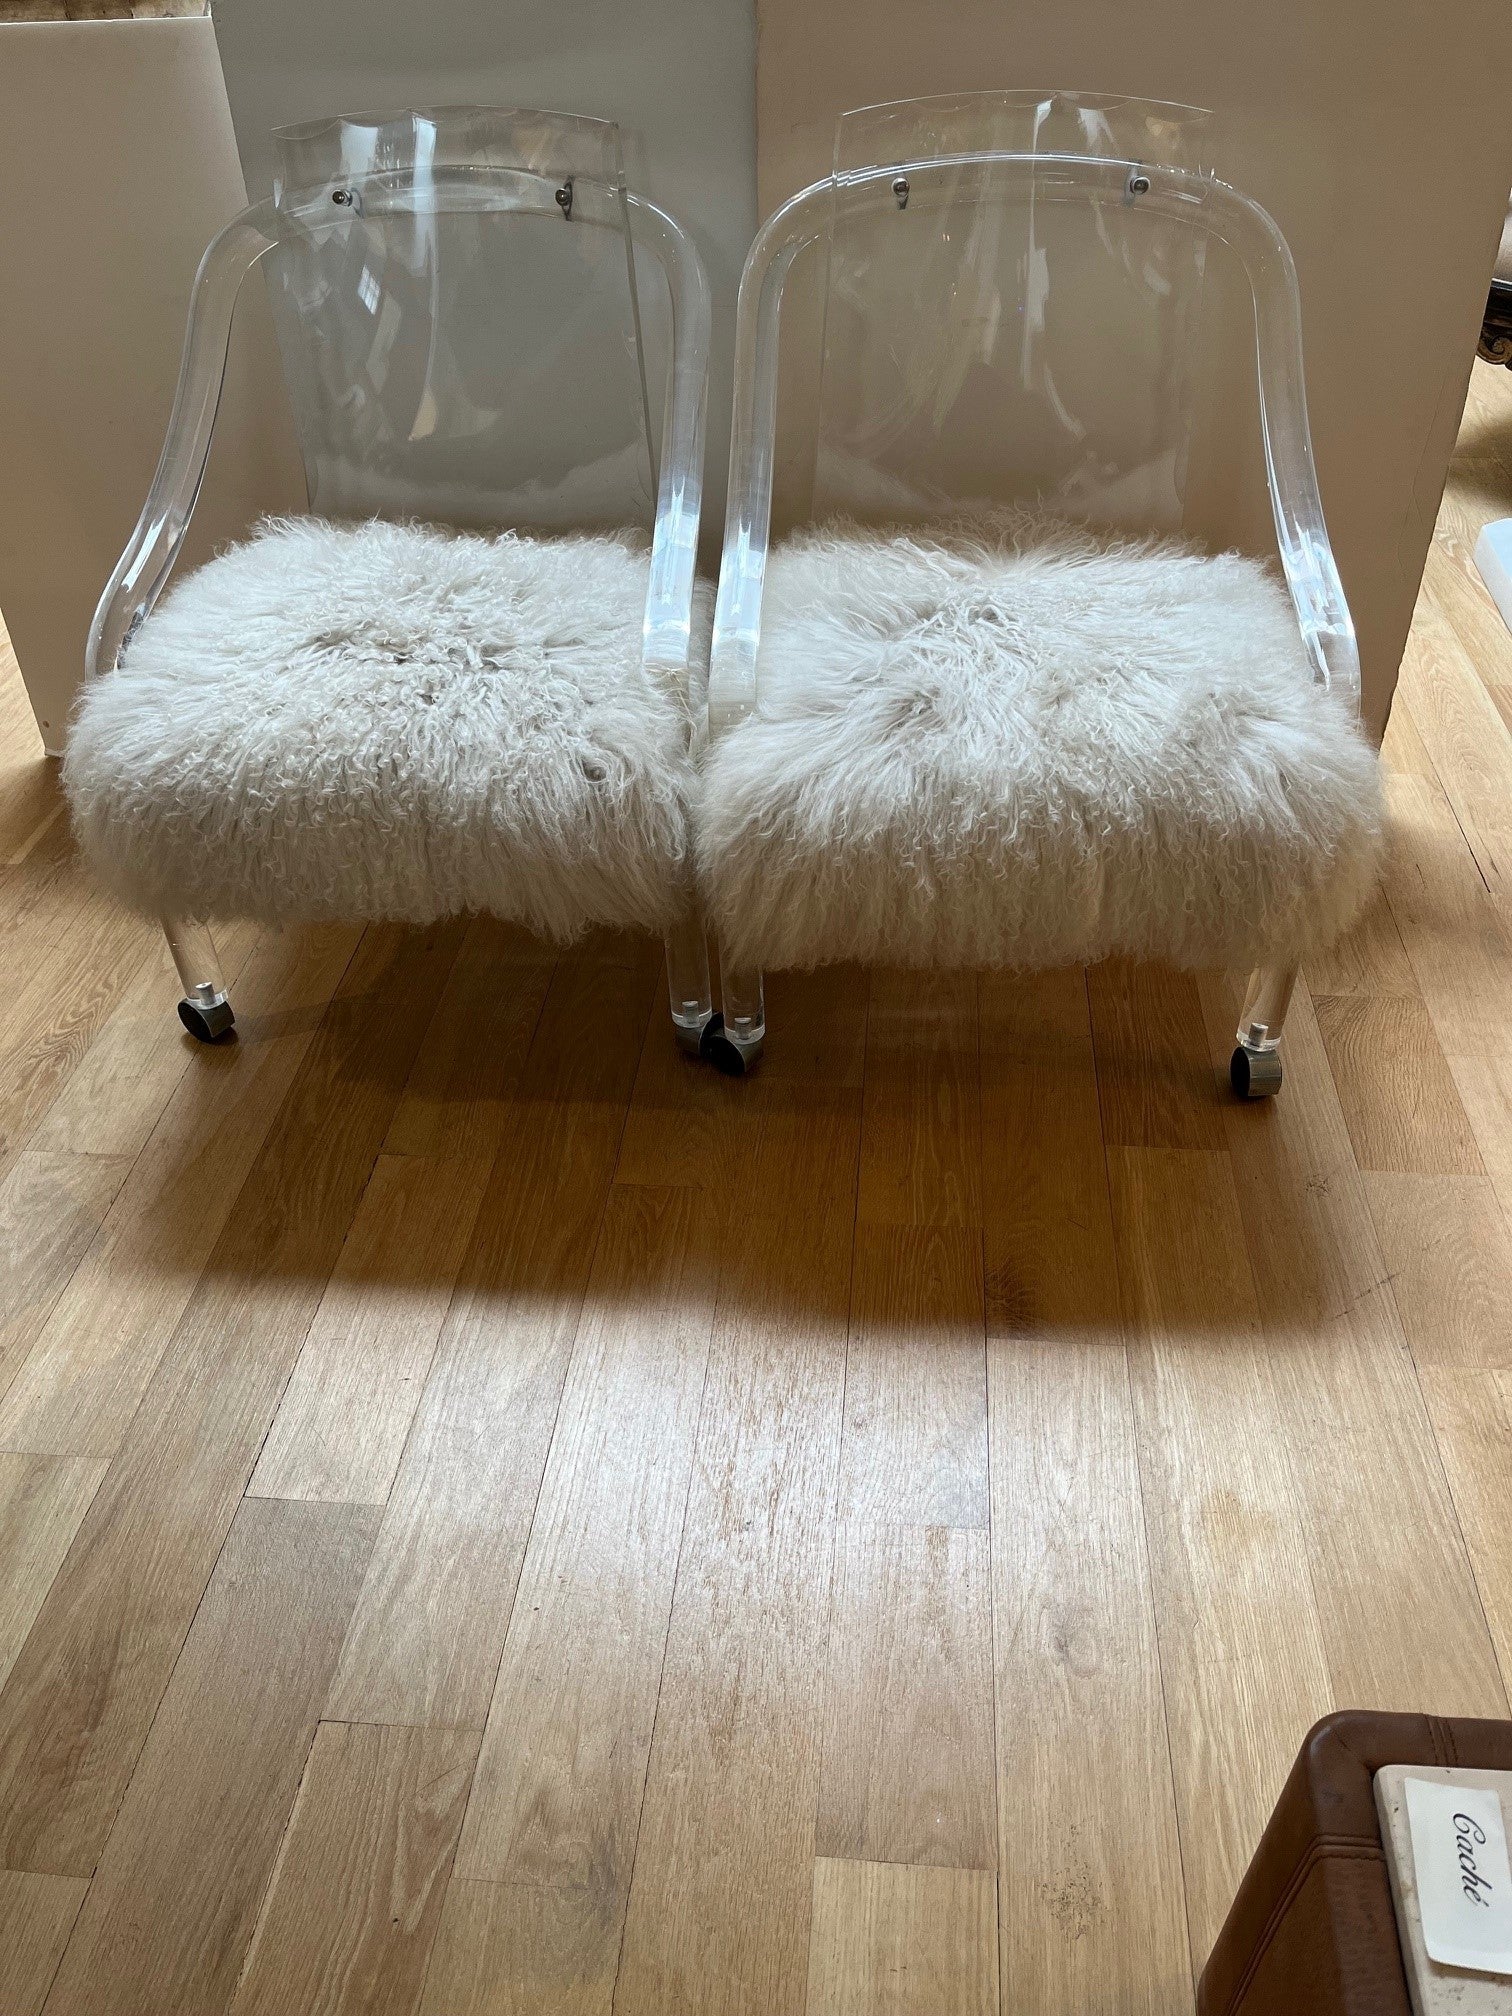 Pair of Vintage Lucite Armchairs Upholstered with Tibetan Lamb Fur Rug, Elegantly Detailed with Scalloped Backs and Graceful Sloping Arms.
***Please Note that these Vintage Pieces from the 1970s and We do make a Reproduction of this Chair for